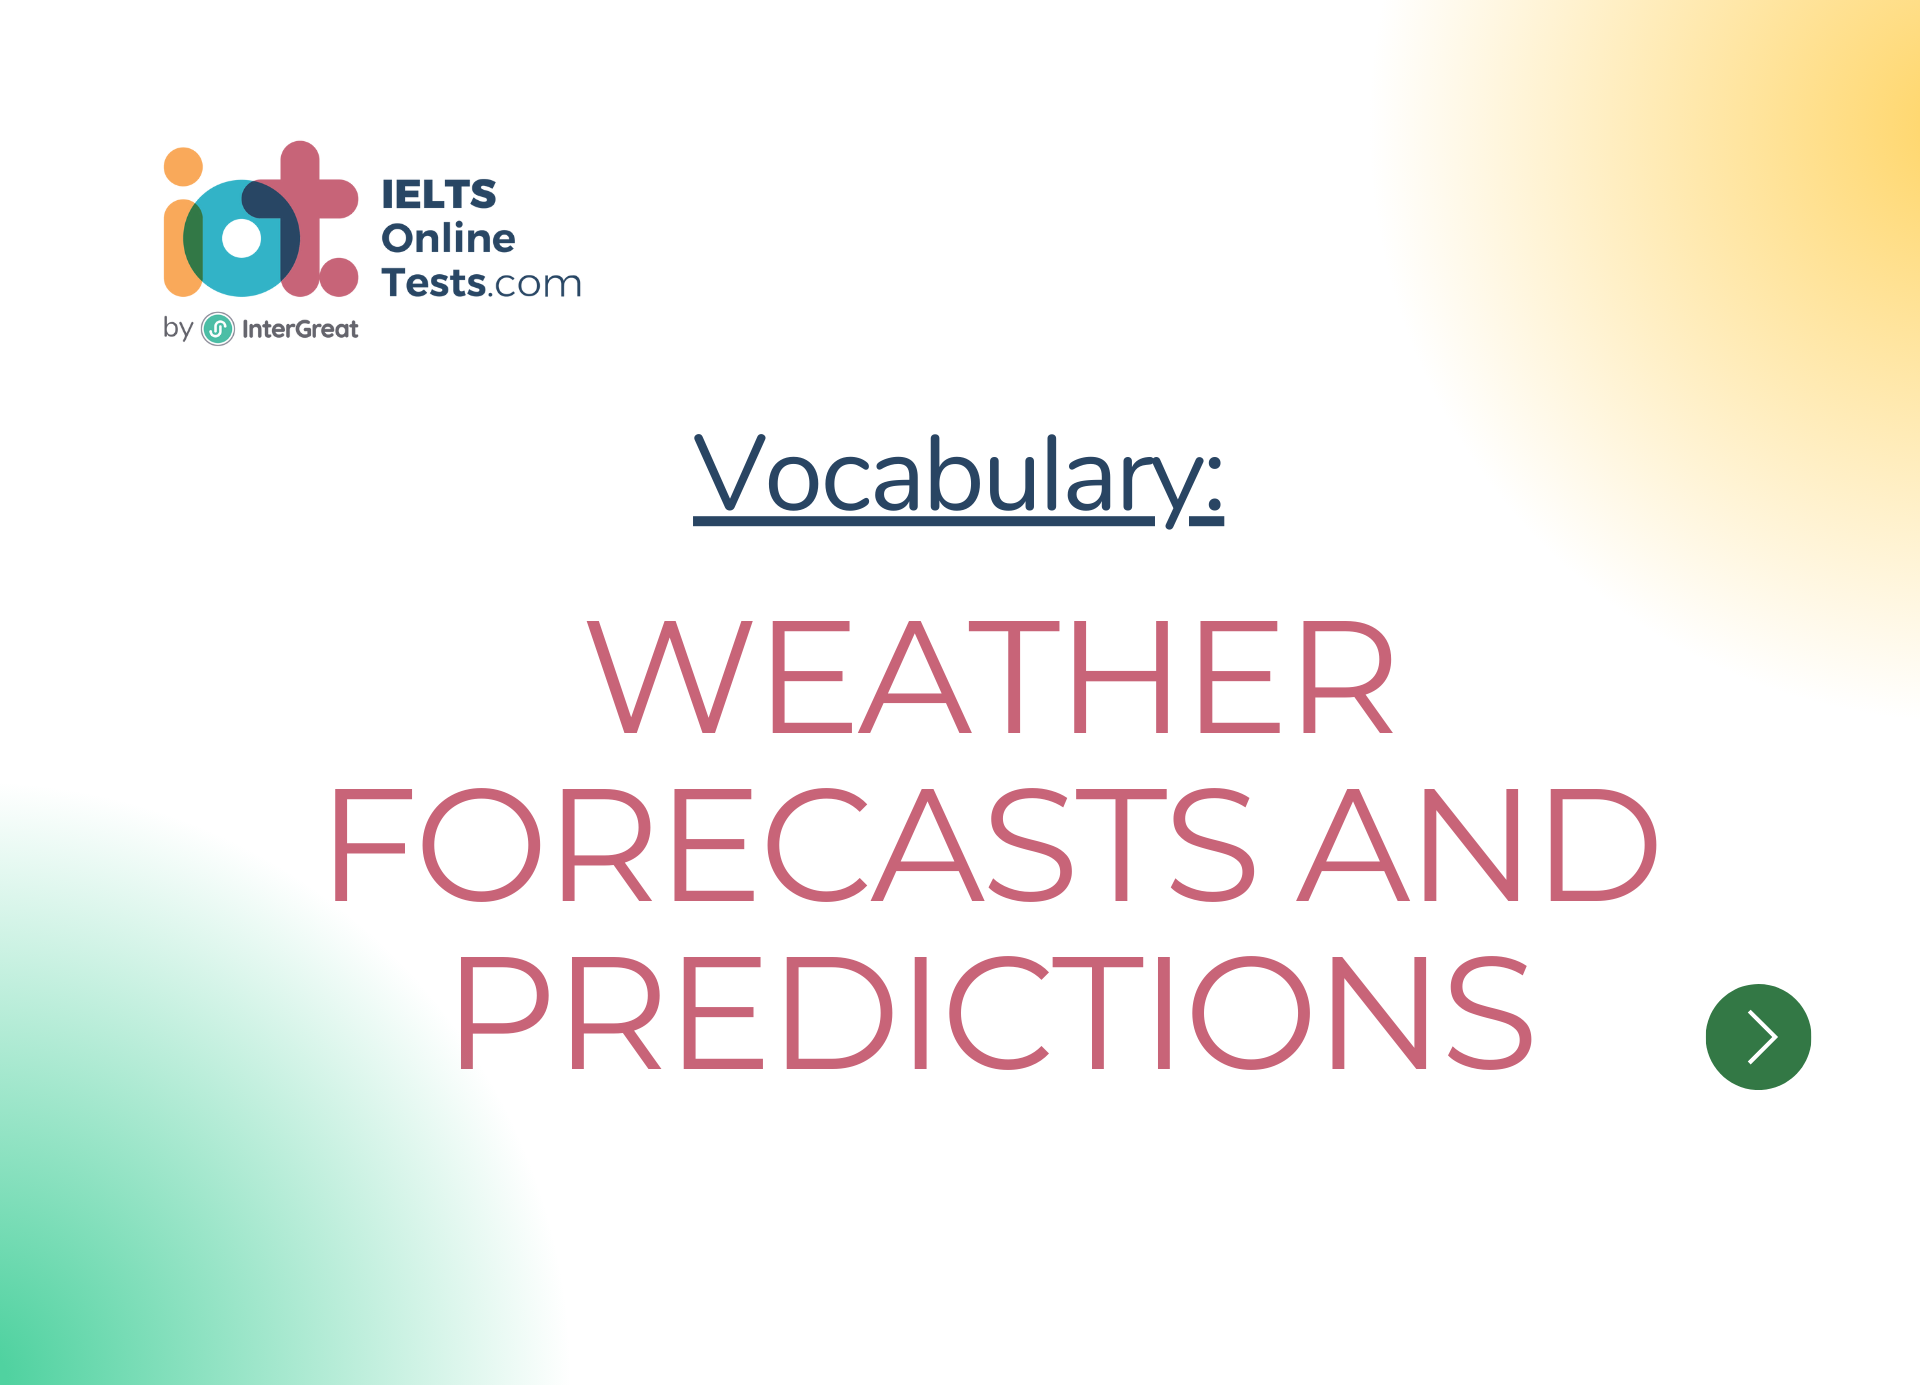 Dự báo thời tiết (Weather forecasts and predictions)